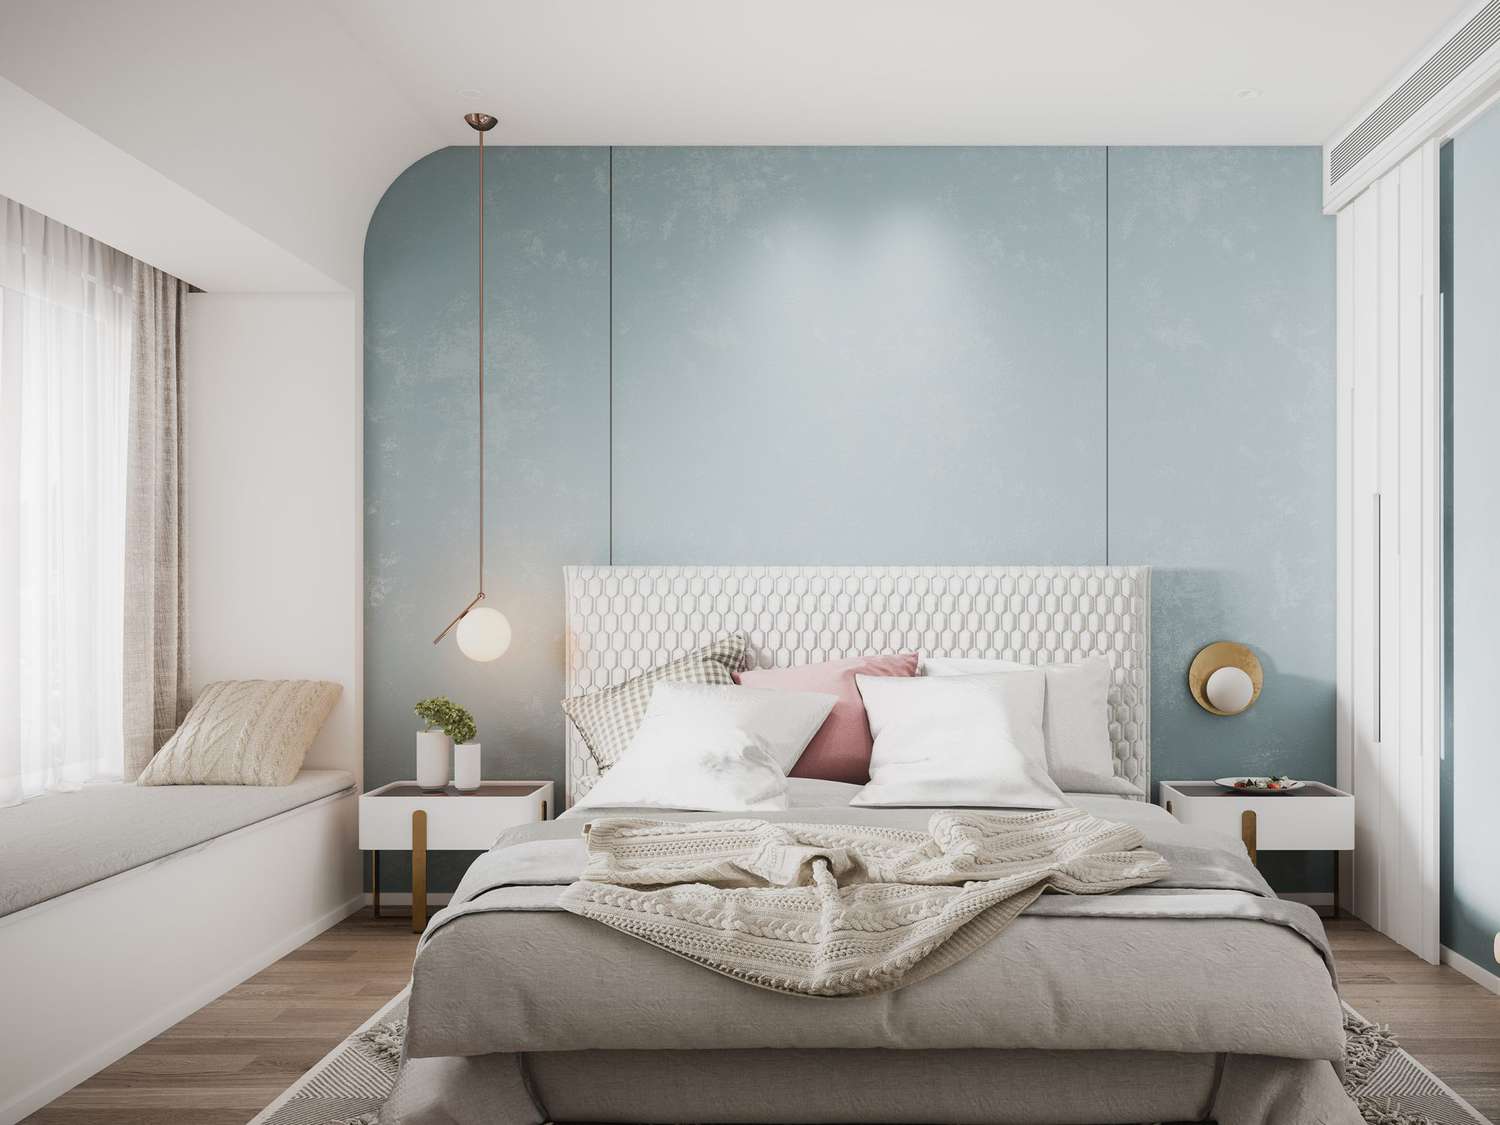 12 Best Bedroom Paint Colors, According to Home Decor Experts